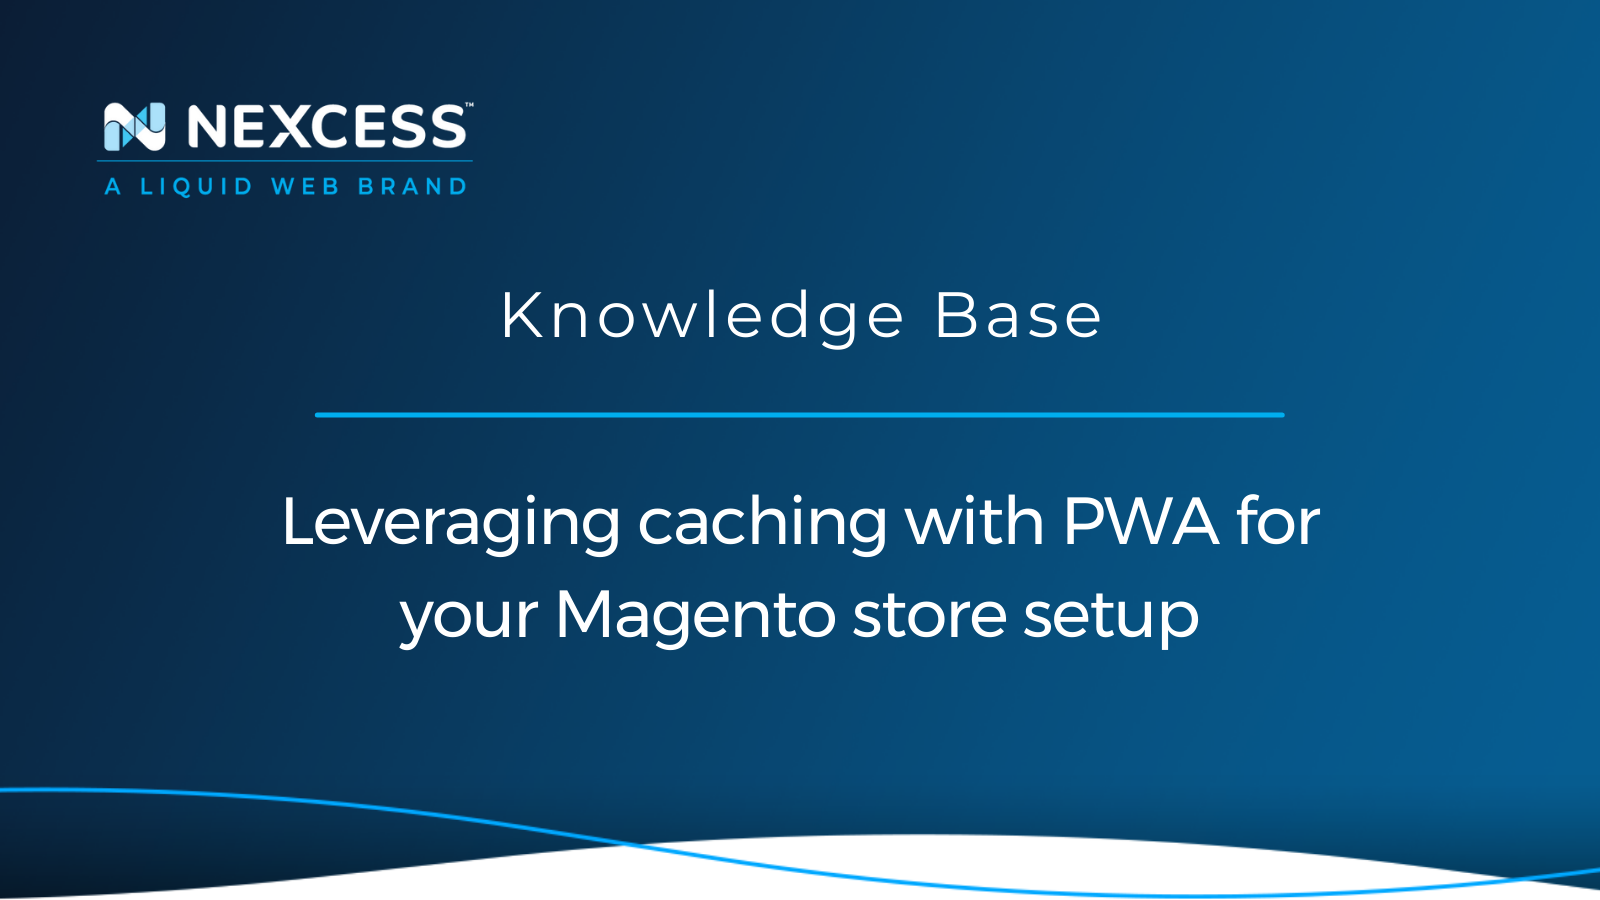 Leveraging caching with PWA for your Magento store setup